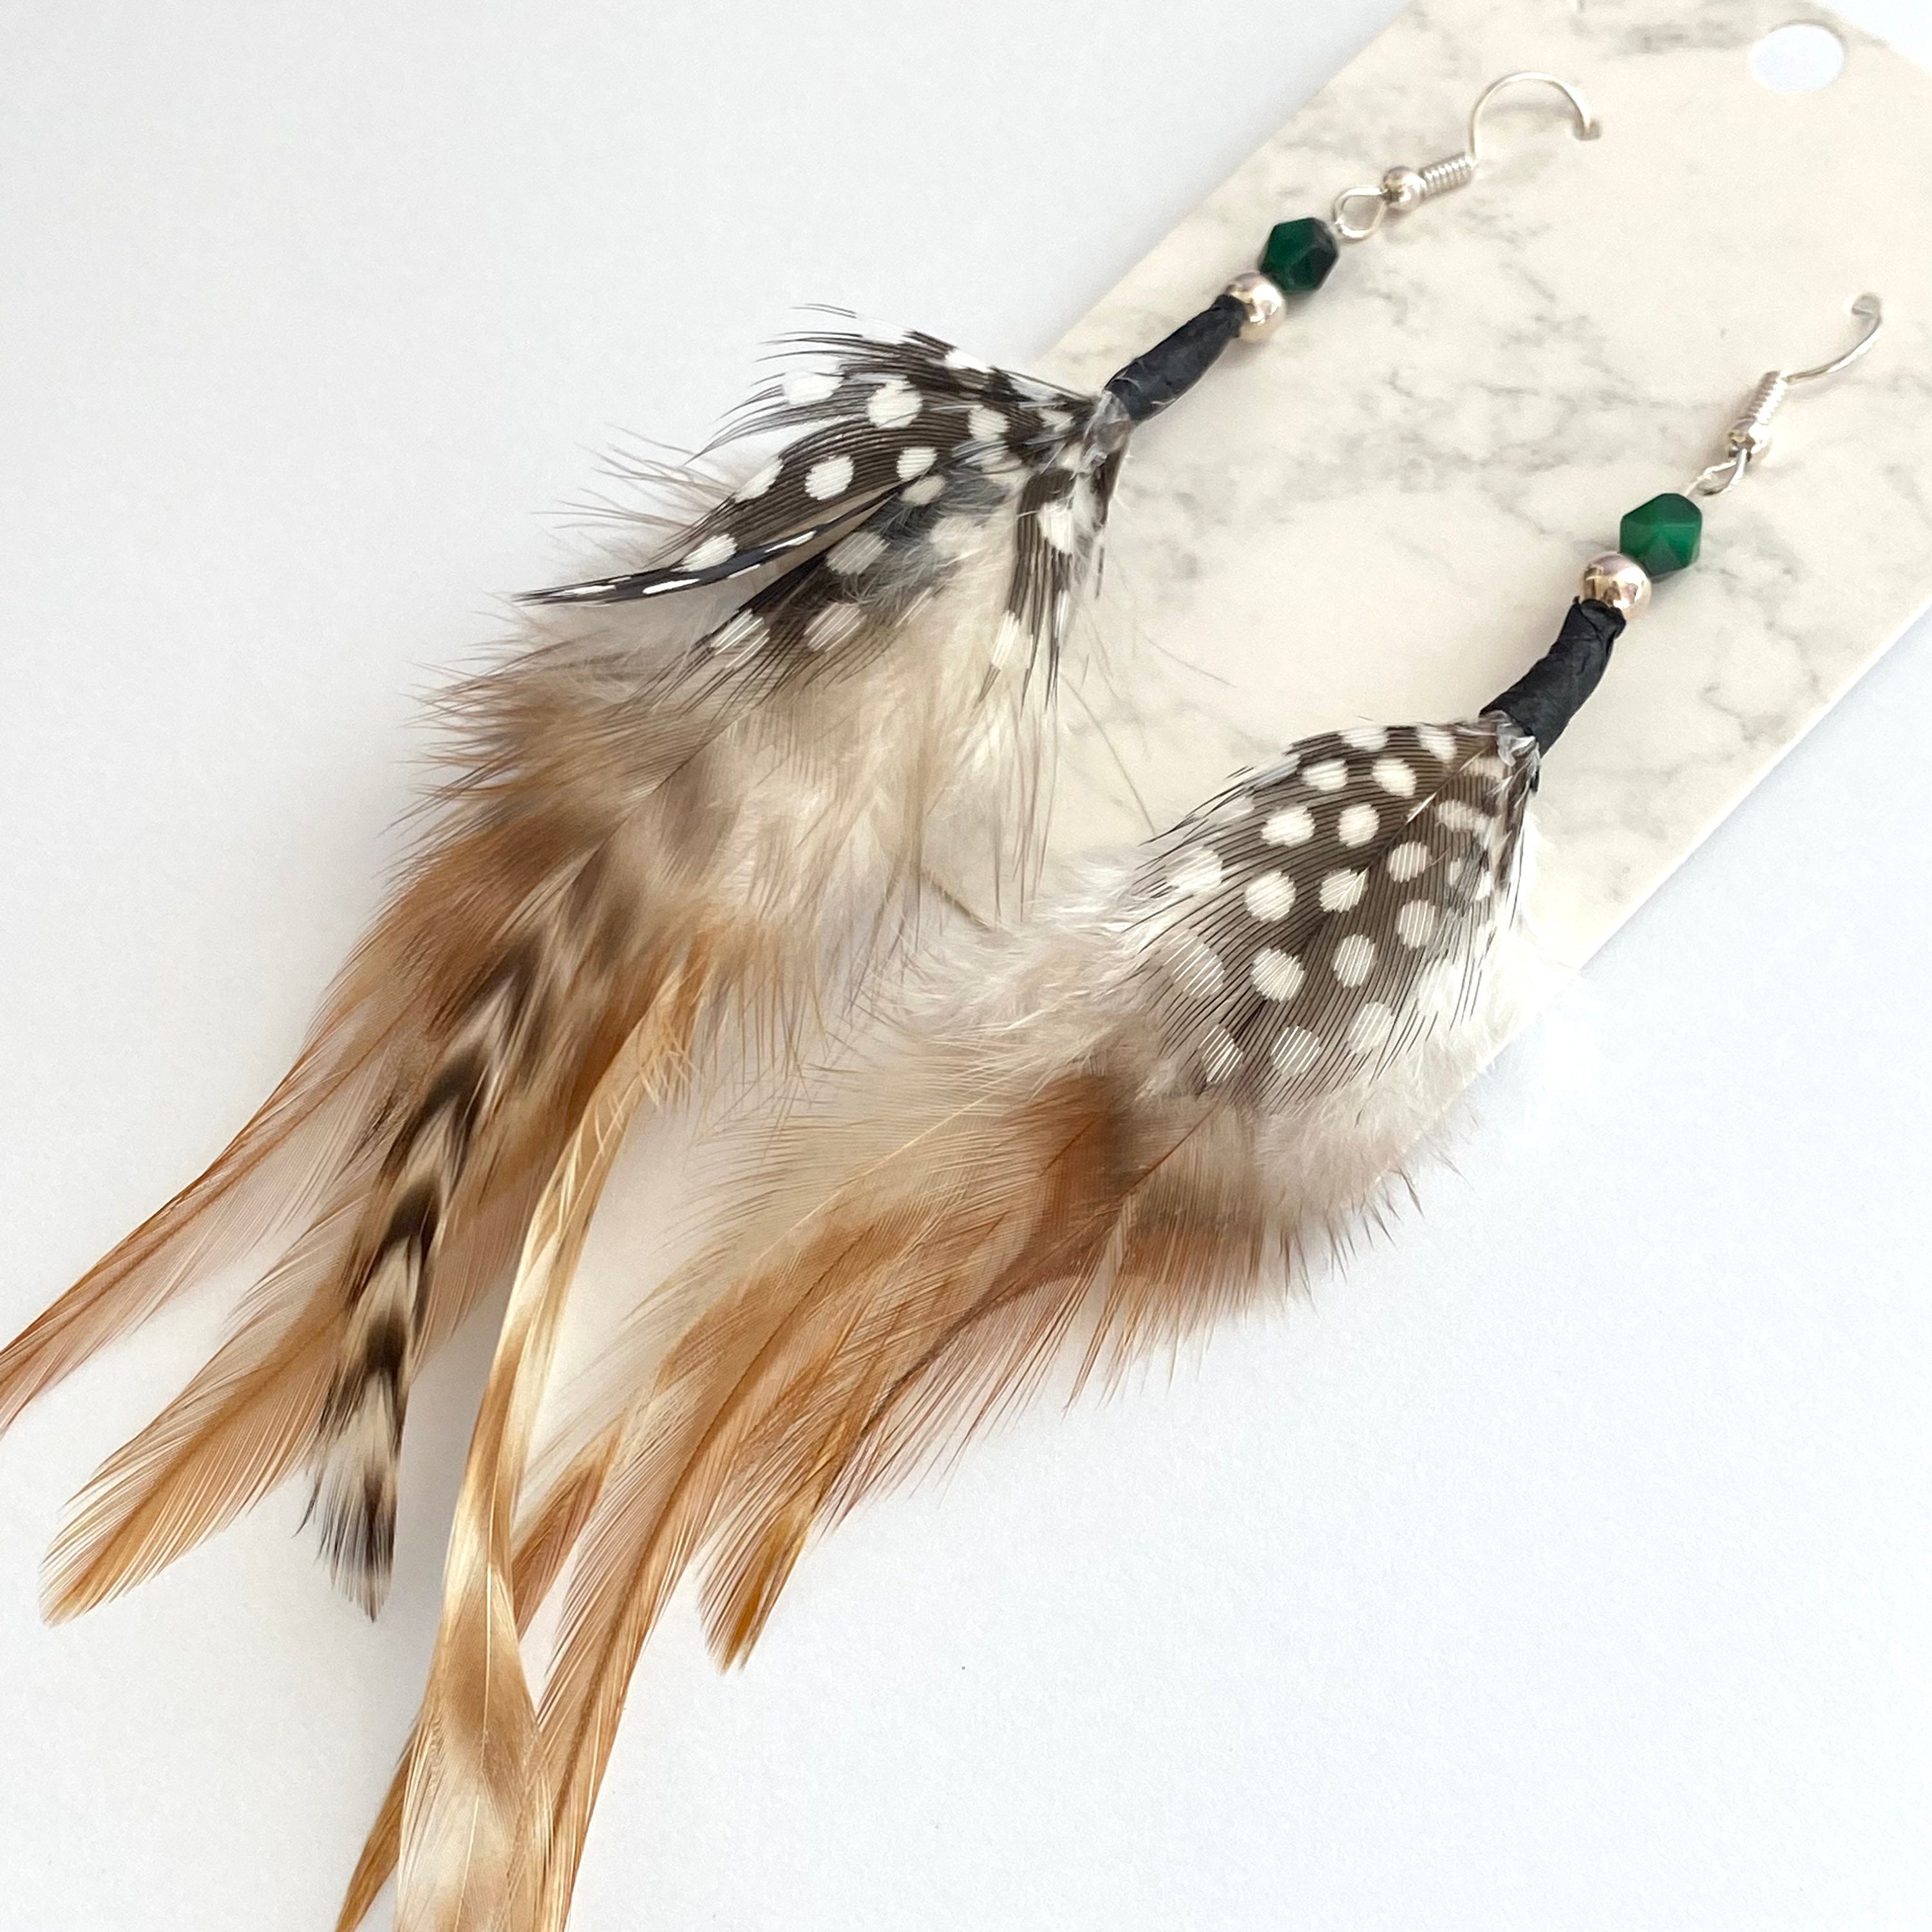 Feathers Pheasant Green feathers| Earrings feathers | Millinery Jewelry  Crafts supplies| Hair accessories Material Natural FA53